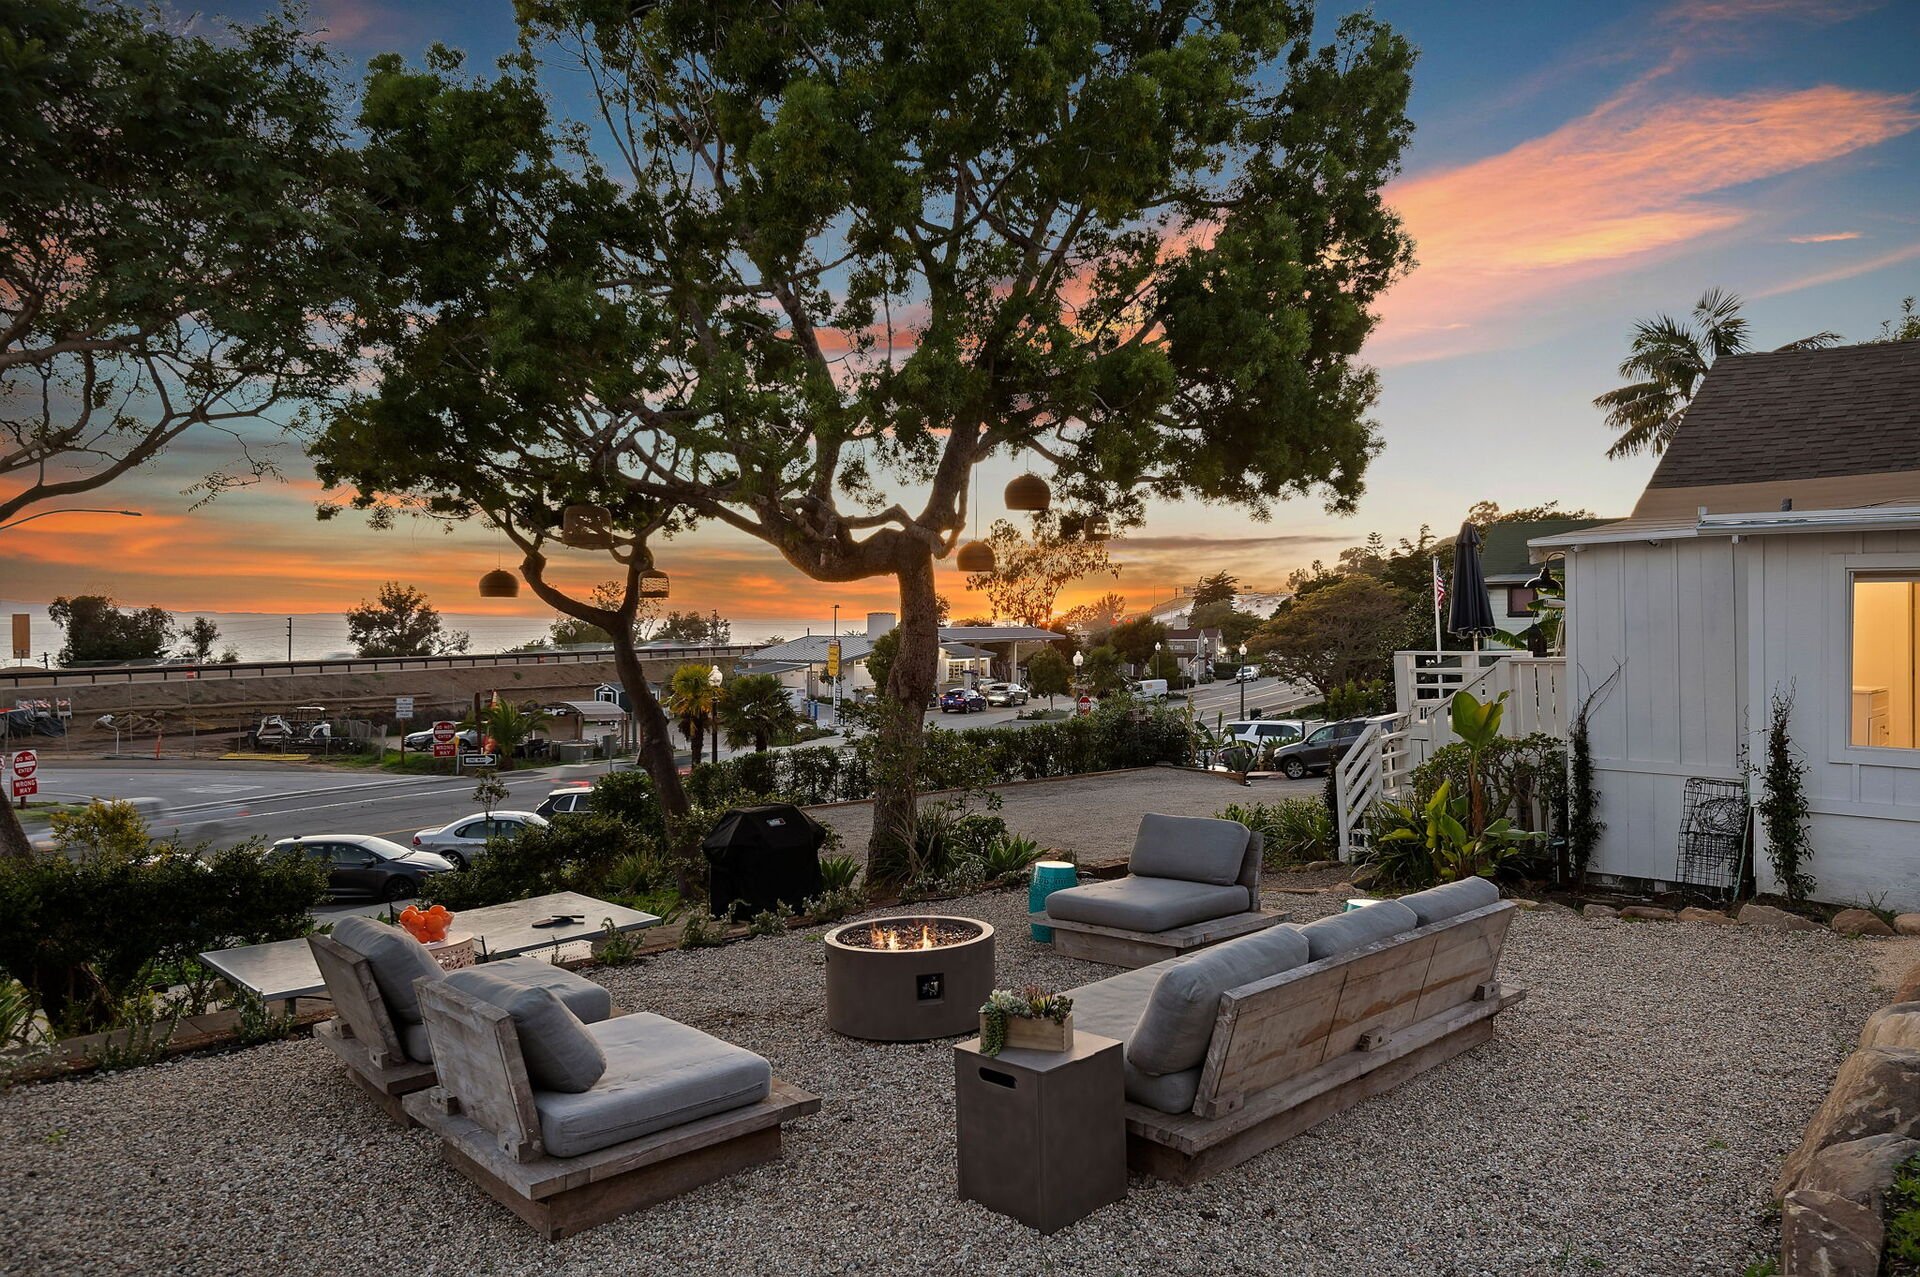 Cuddle up around the fire pit and enjoy the sunset.